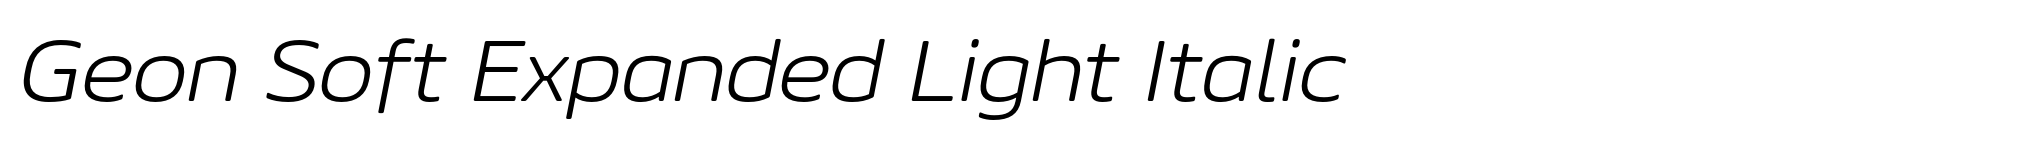 Geon Soft Expanded Light Italic image